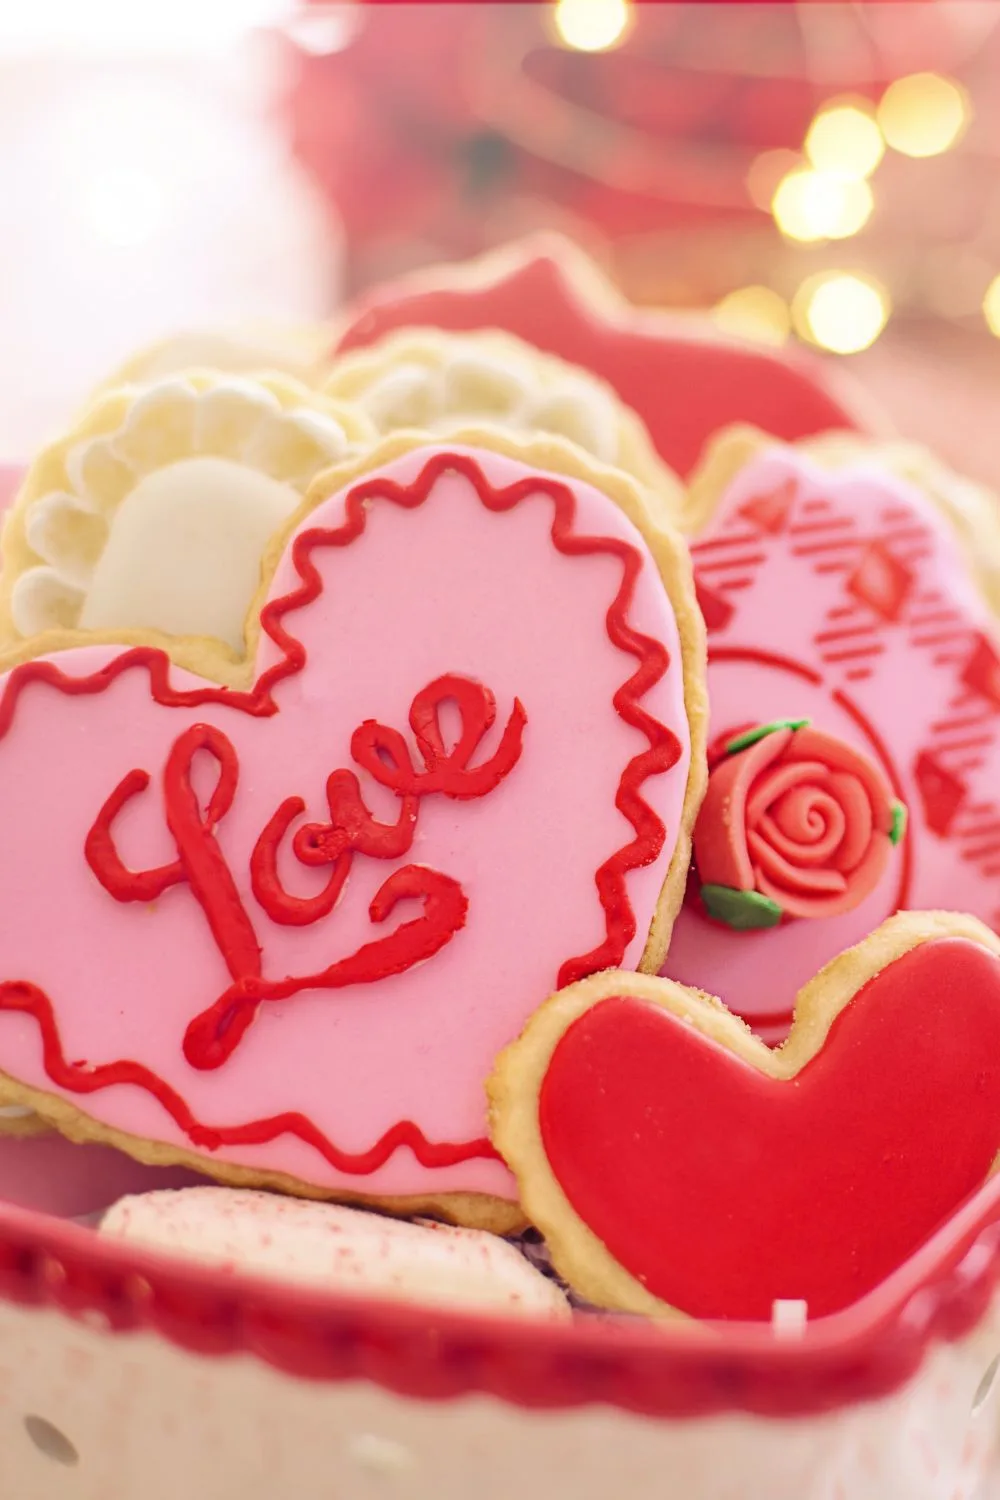 sugar cookies in the shape of hearts and decorated with icing